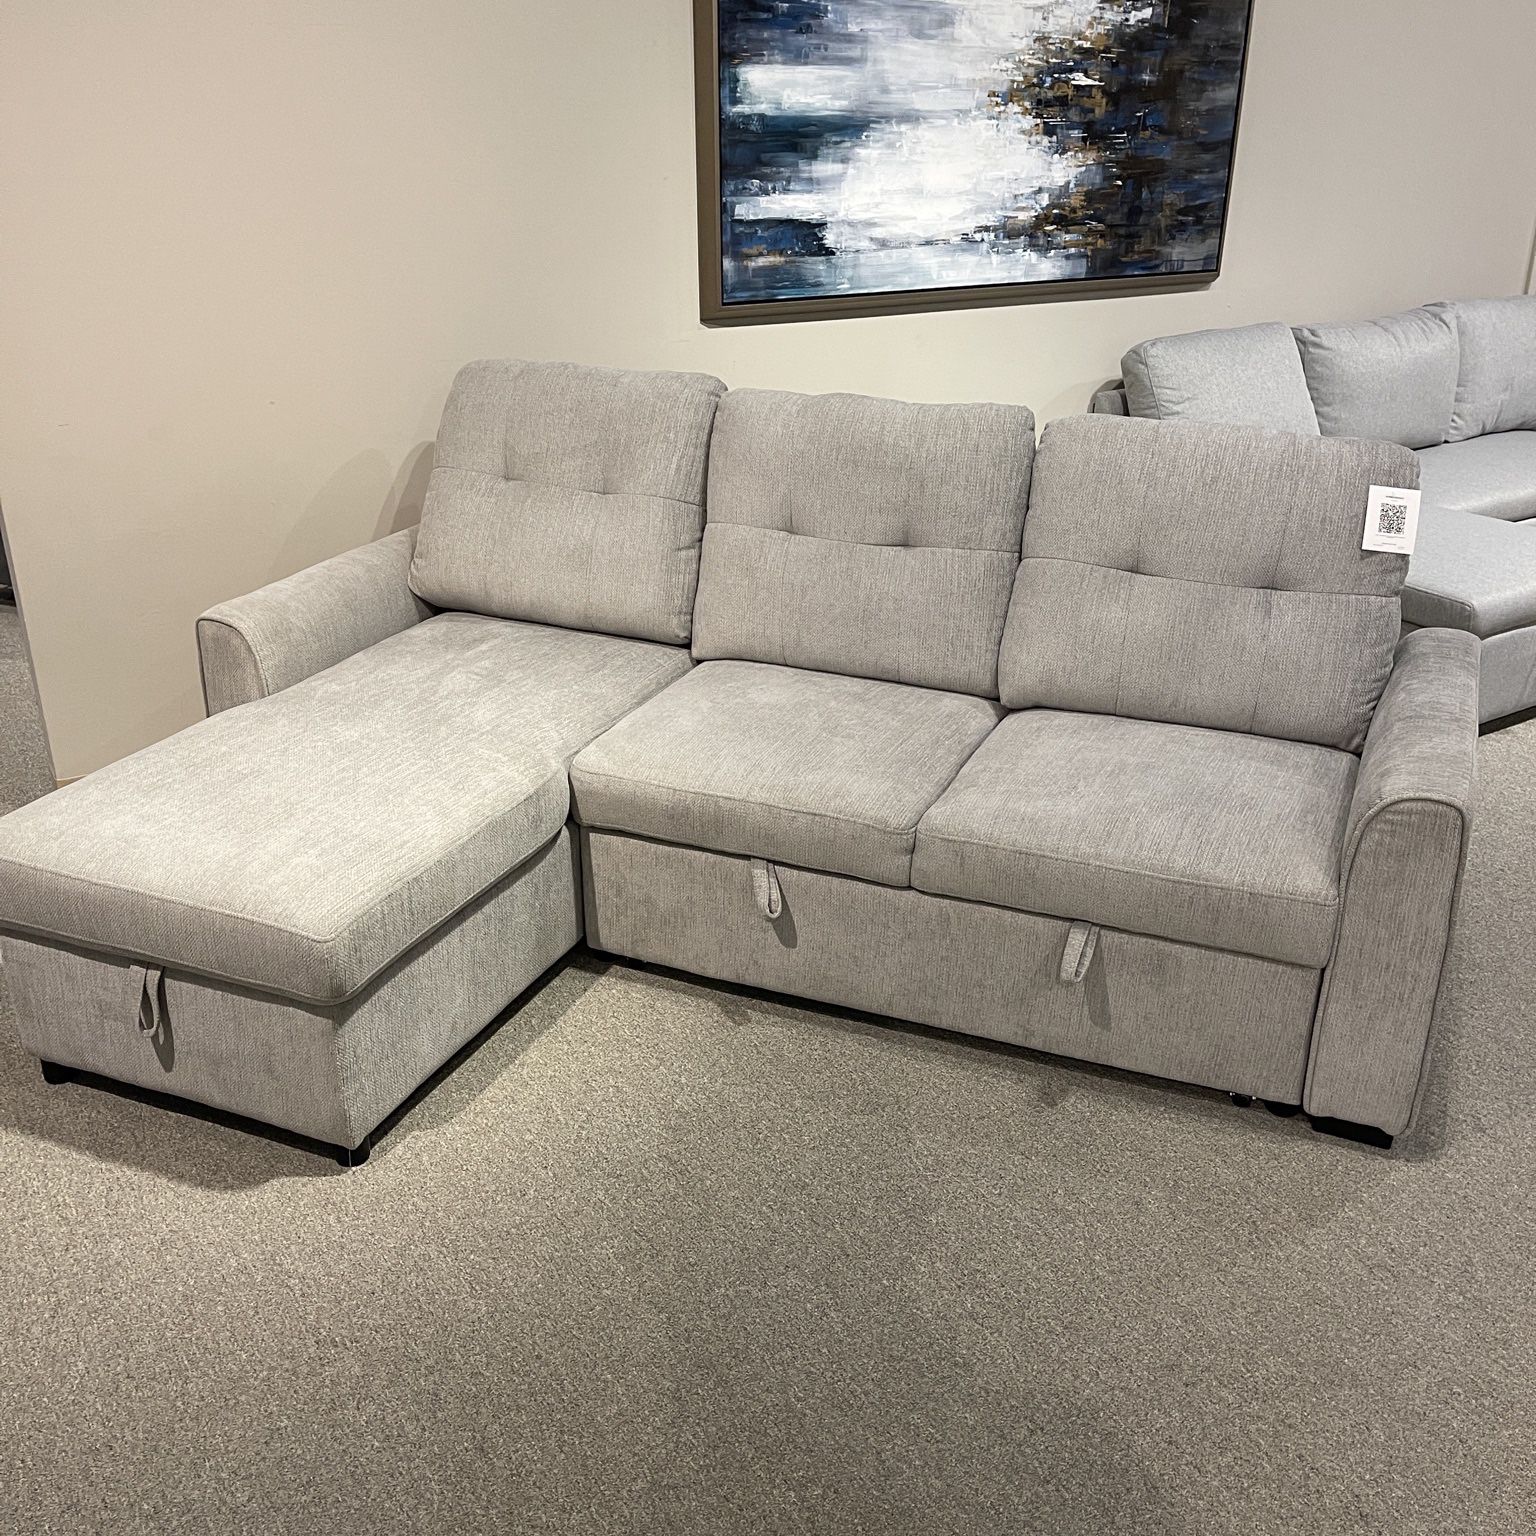 Reversible Sectional Pull Out Bed With Storage